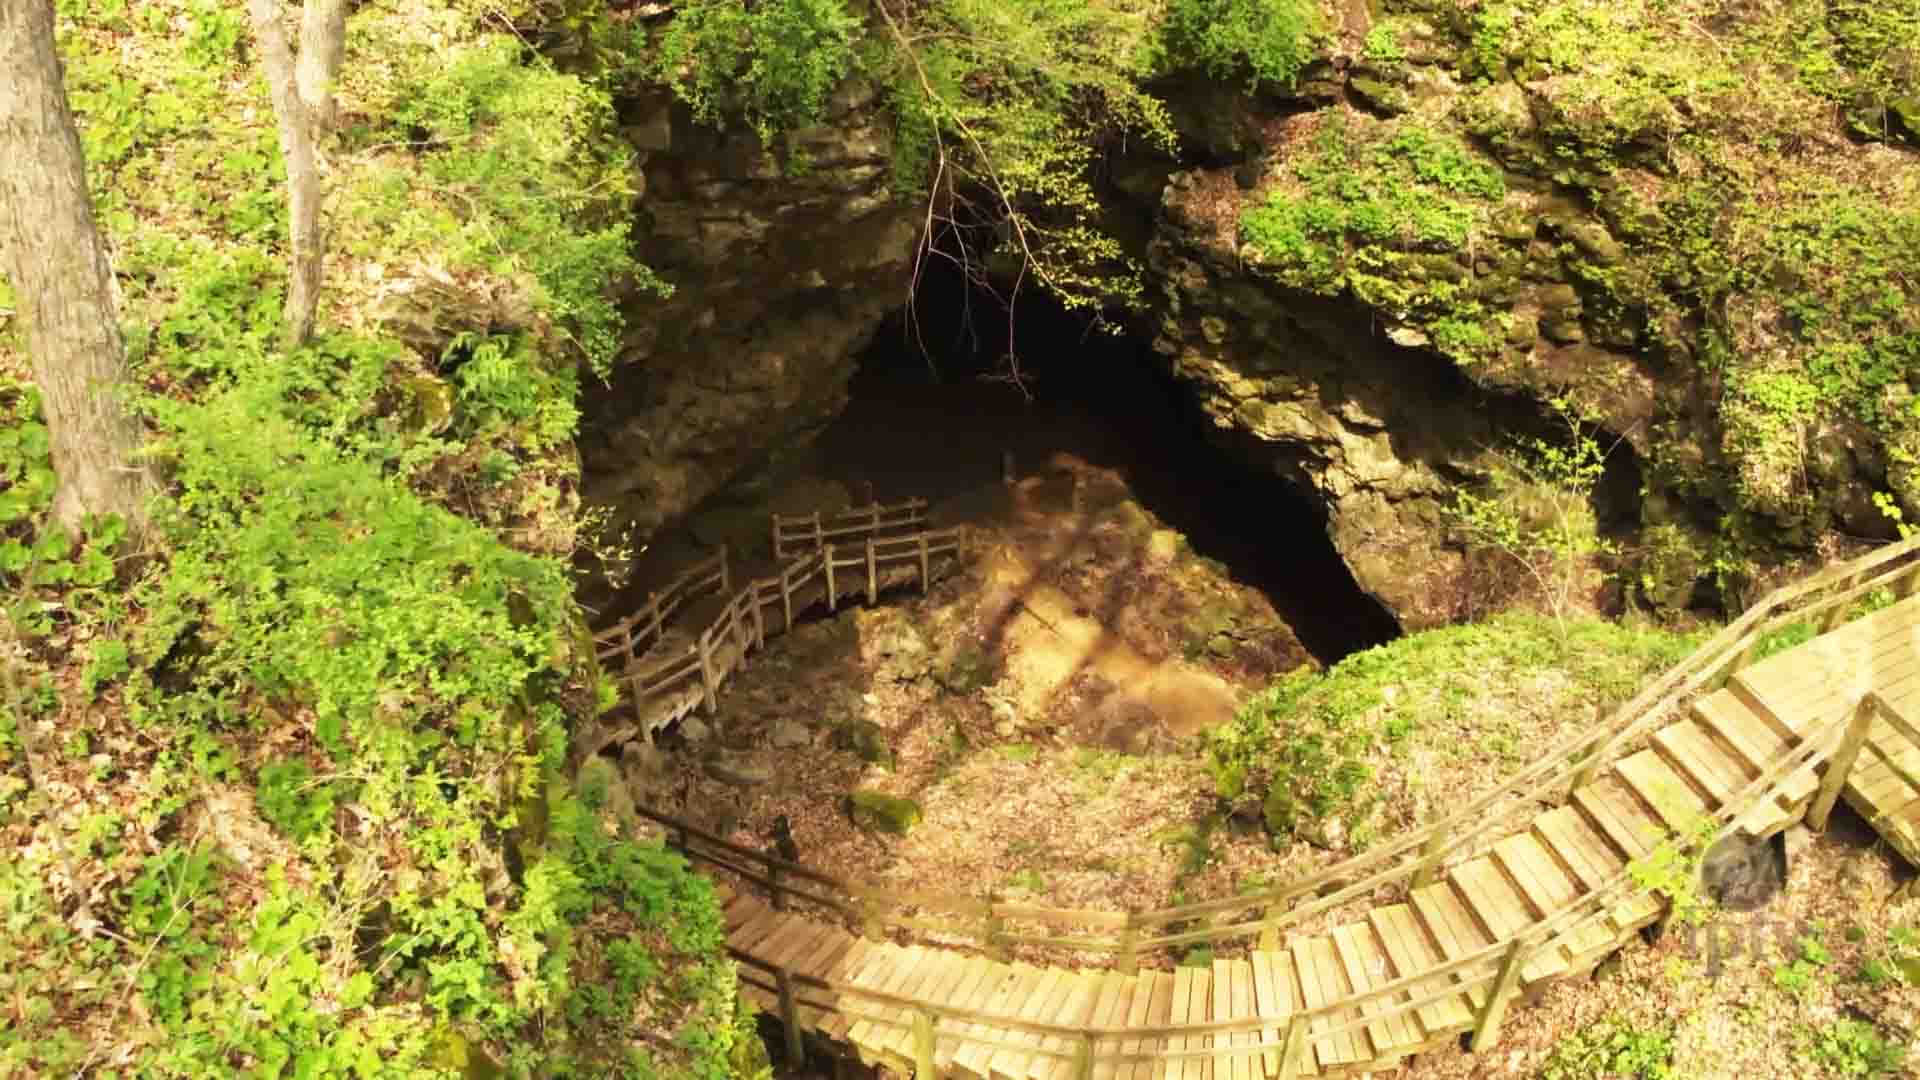 An overhead view looking down on an entrance into one of the Maquoketa Caves.